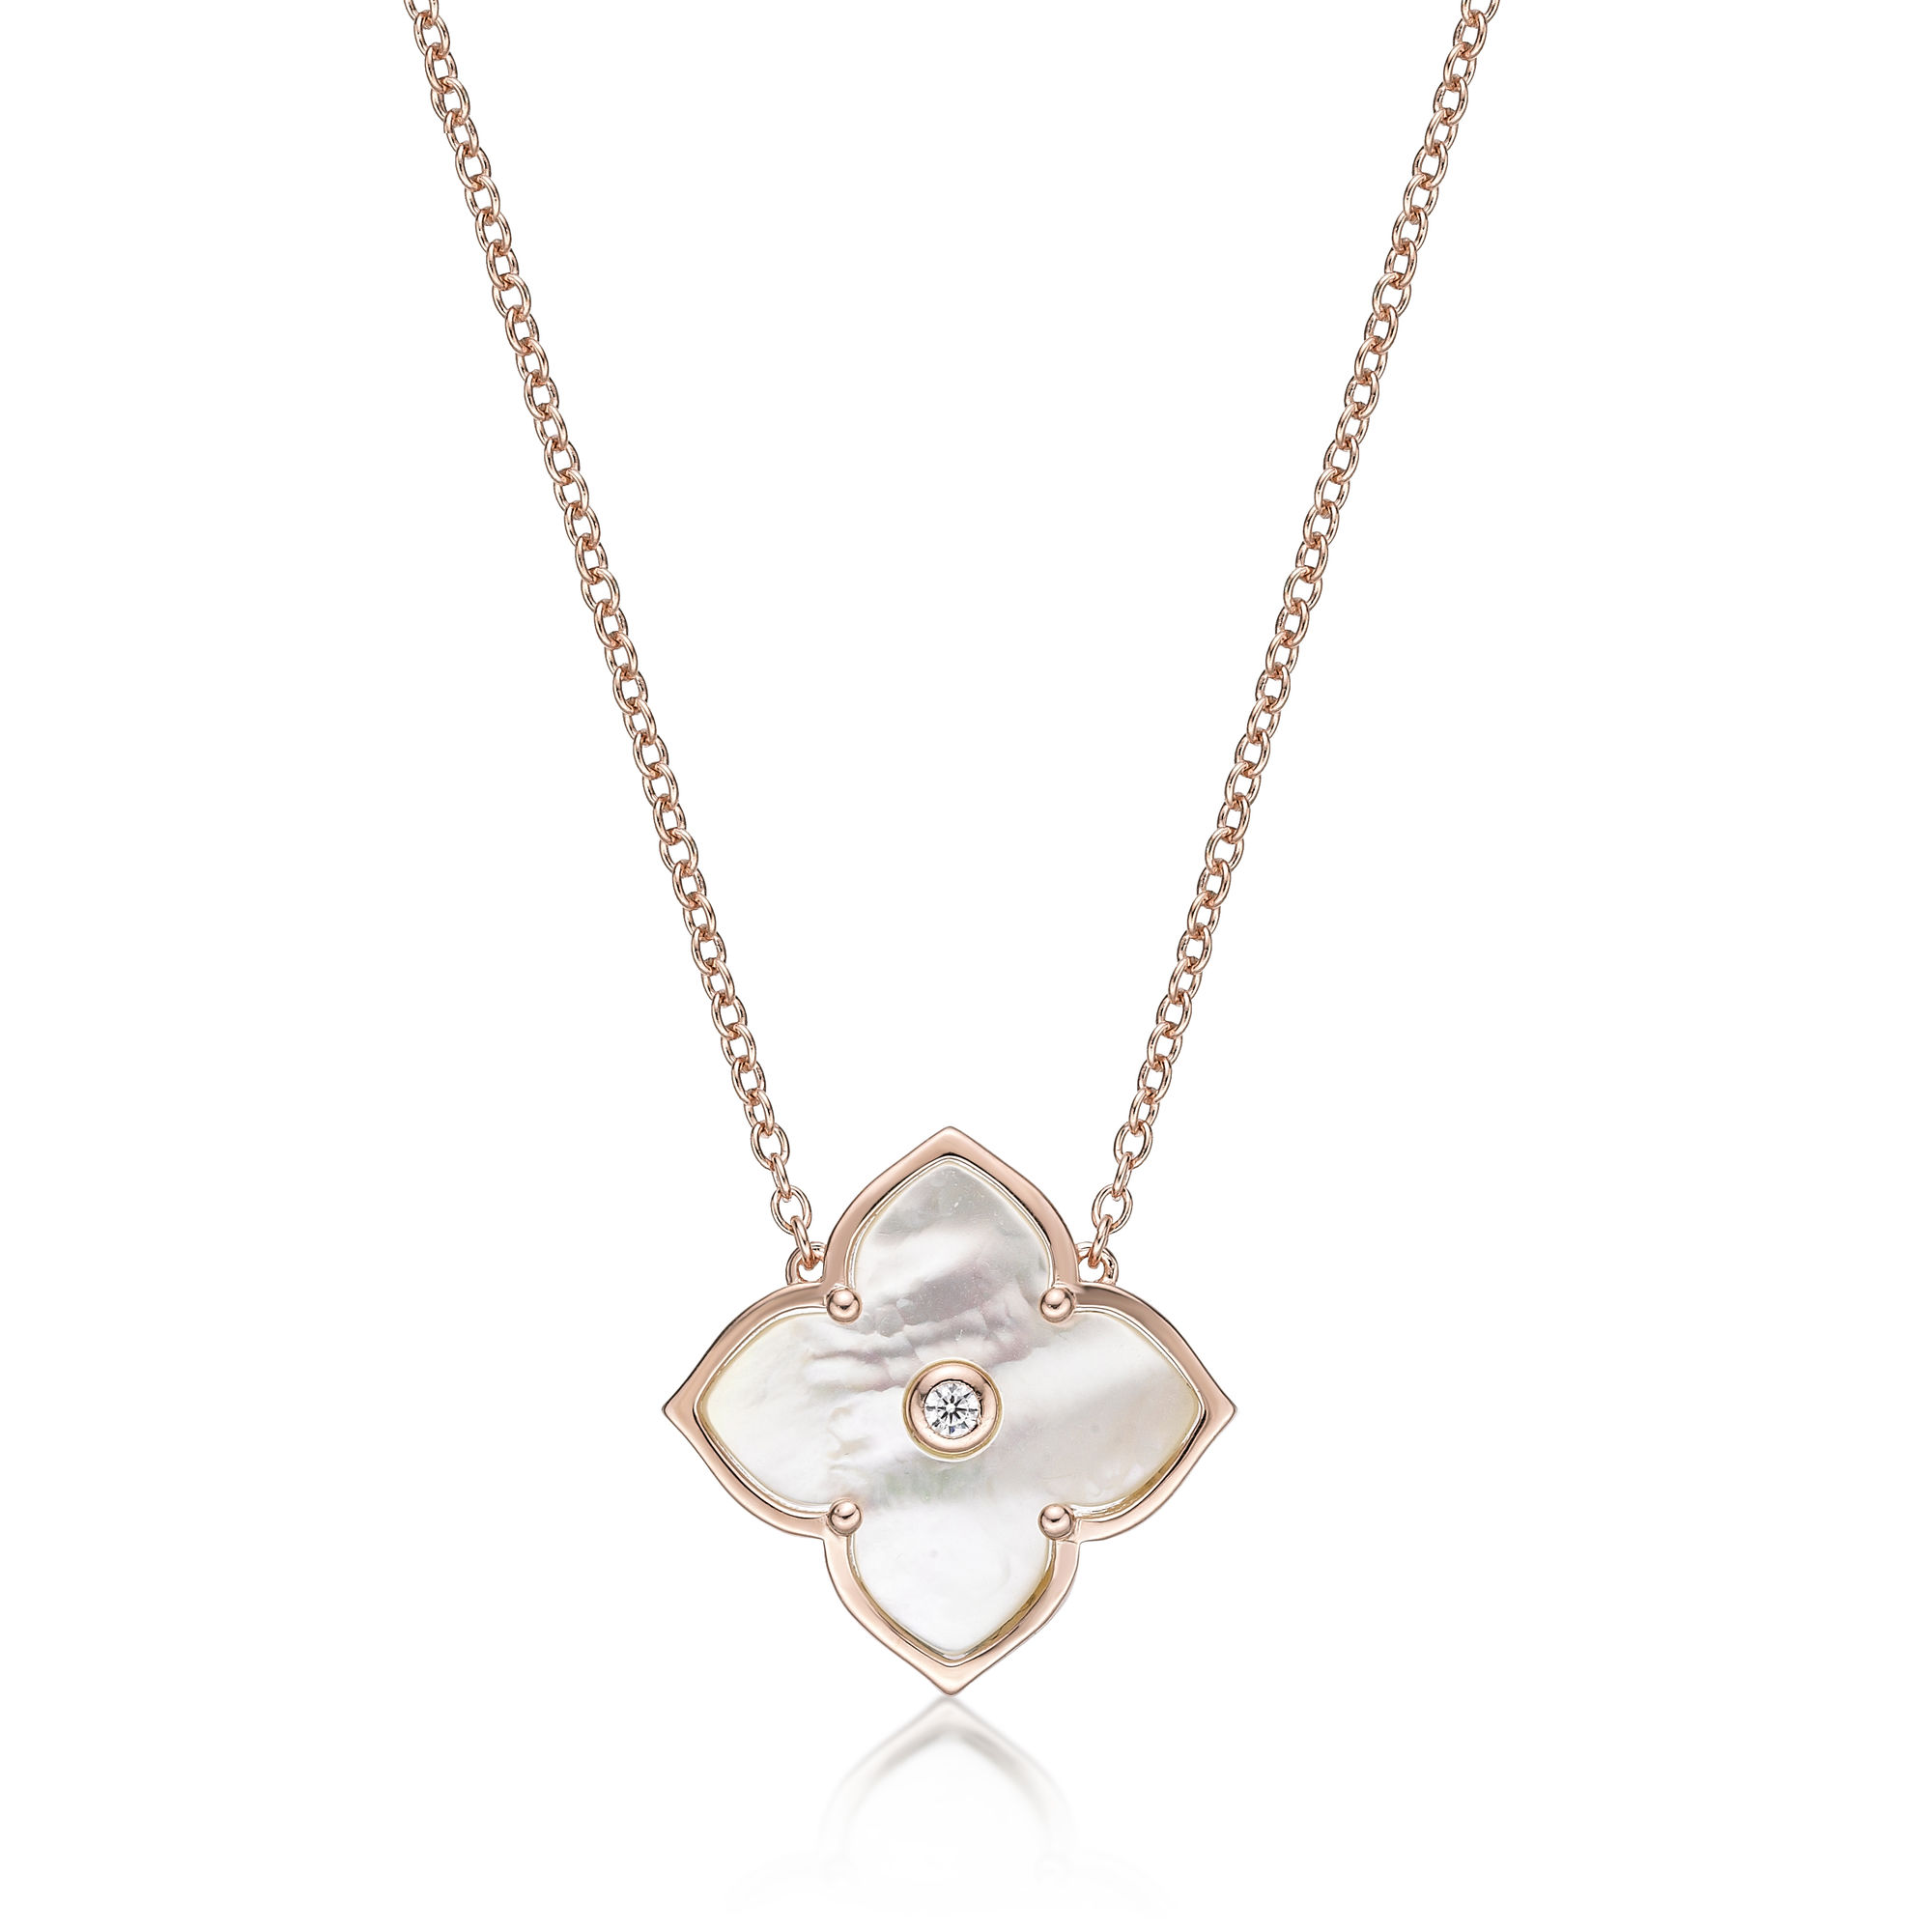 Women's Mother of Pearl Flower Pendant Necklace in Rose Gold Plate Sterling Silver with Cubic Zirconia - 16-18 Inch Adjustable Cable Chain - Flora | Lavari Jewelers